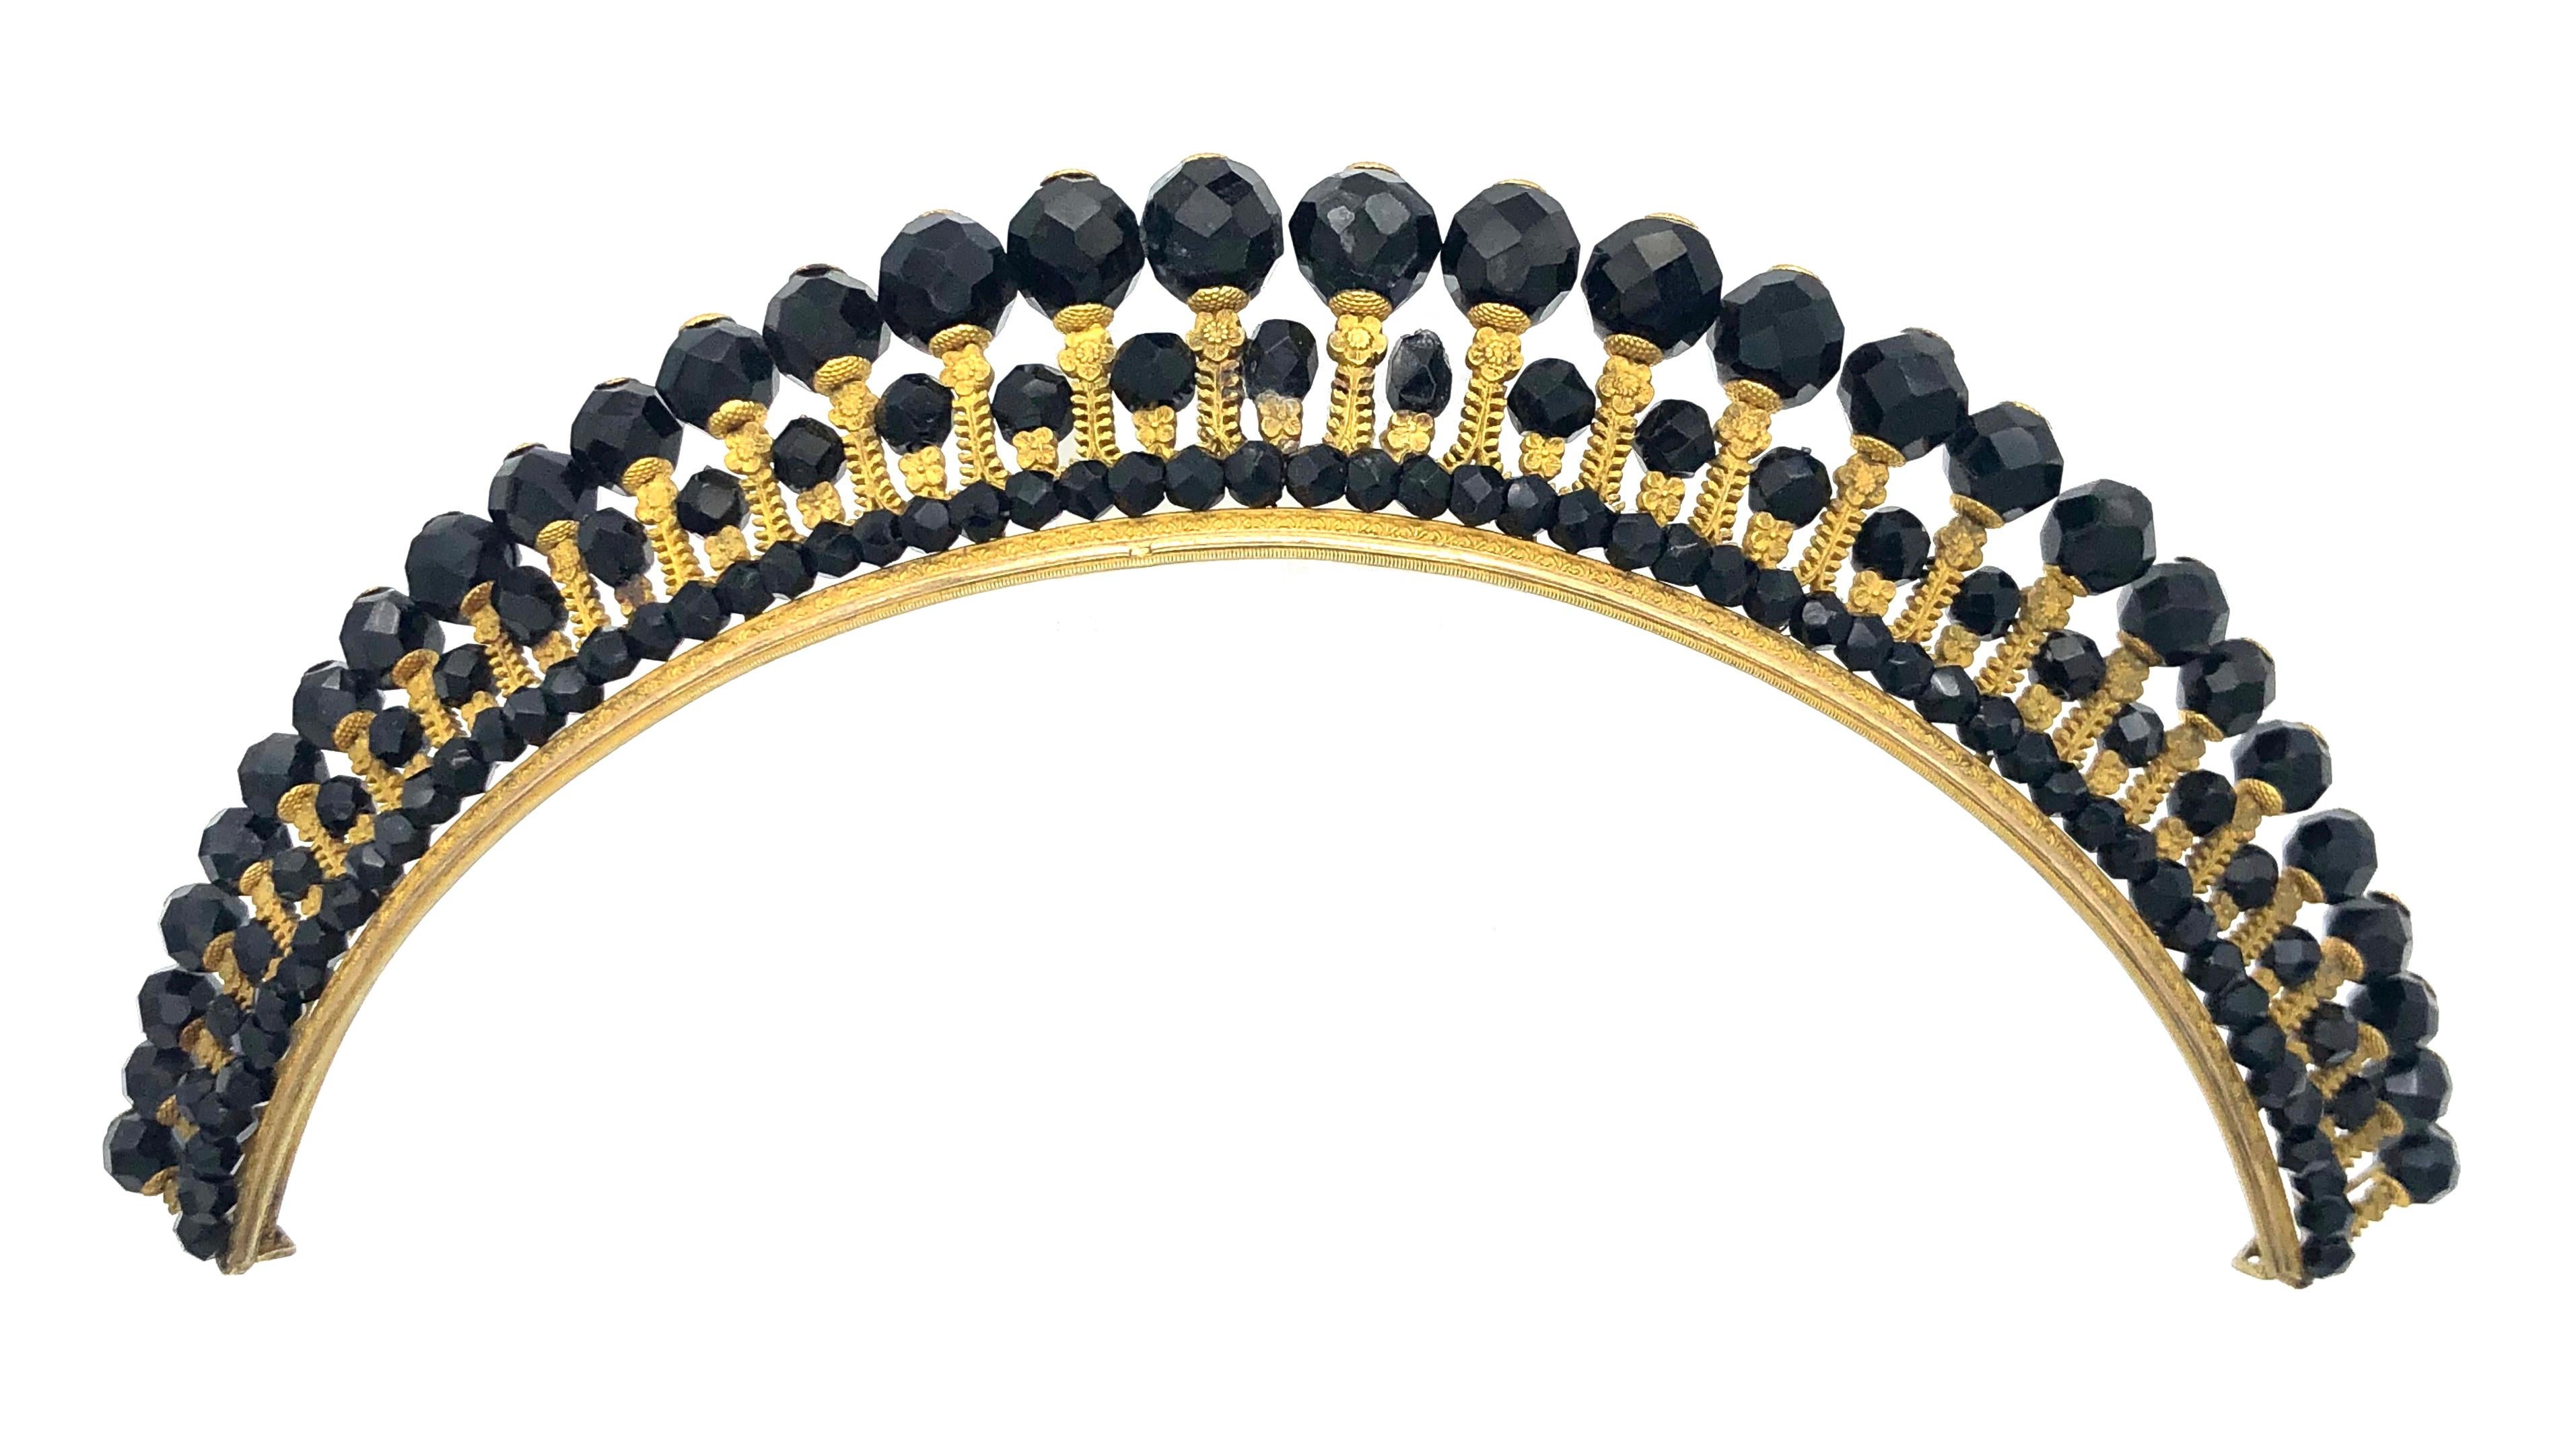 Tiaras from the Empire period are very rare indeed, this fine example is made cetted onyx beads and finely worked fire guilt metal.